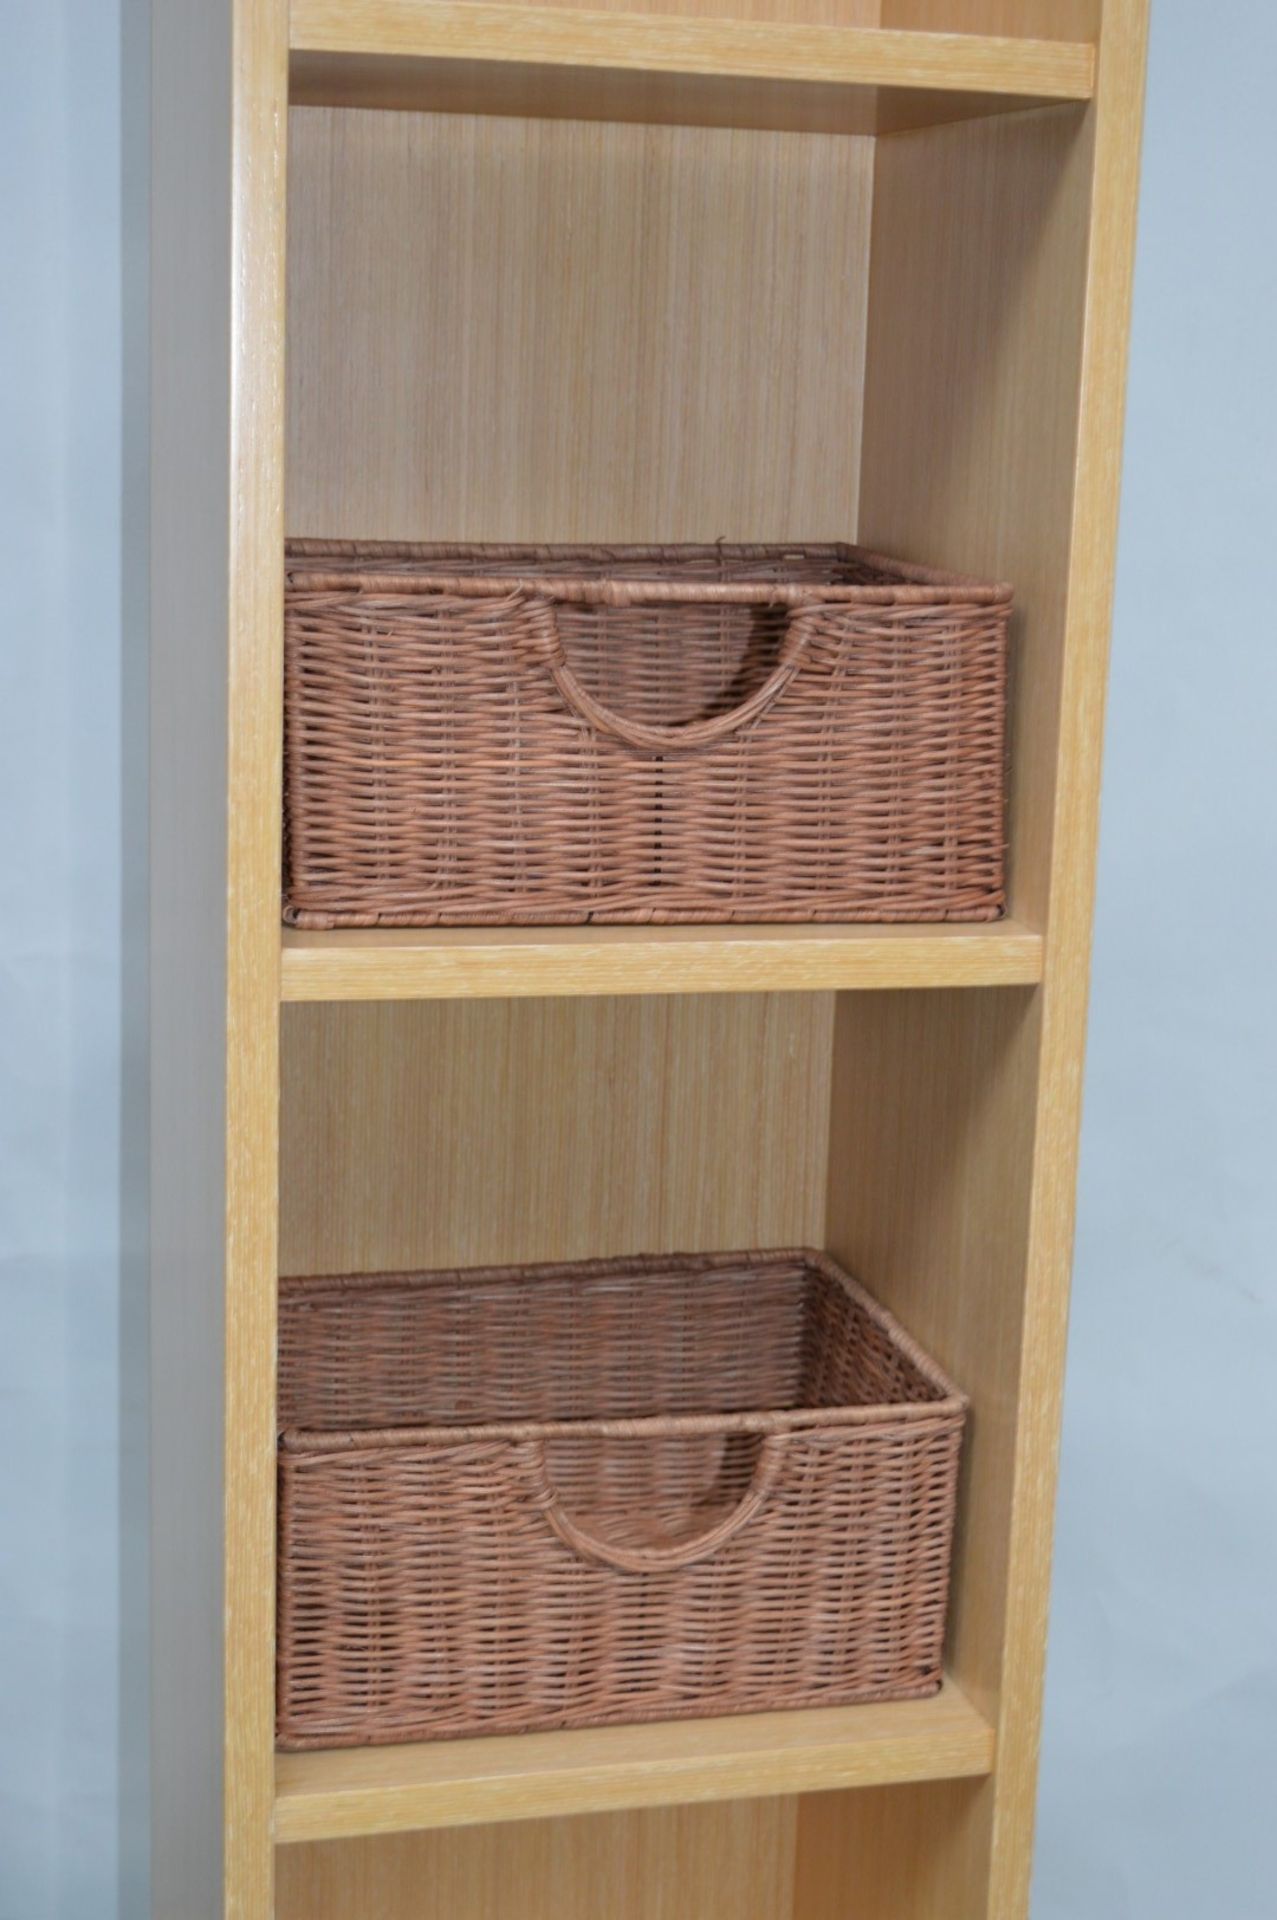 1 x Vogue ARC Series 2 Bathroom Storage Shelving Unit - Wall Mounted or Floor Standing - OAK - Image 7 of 8